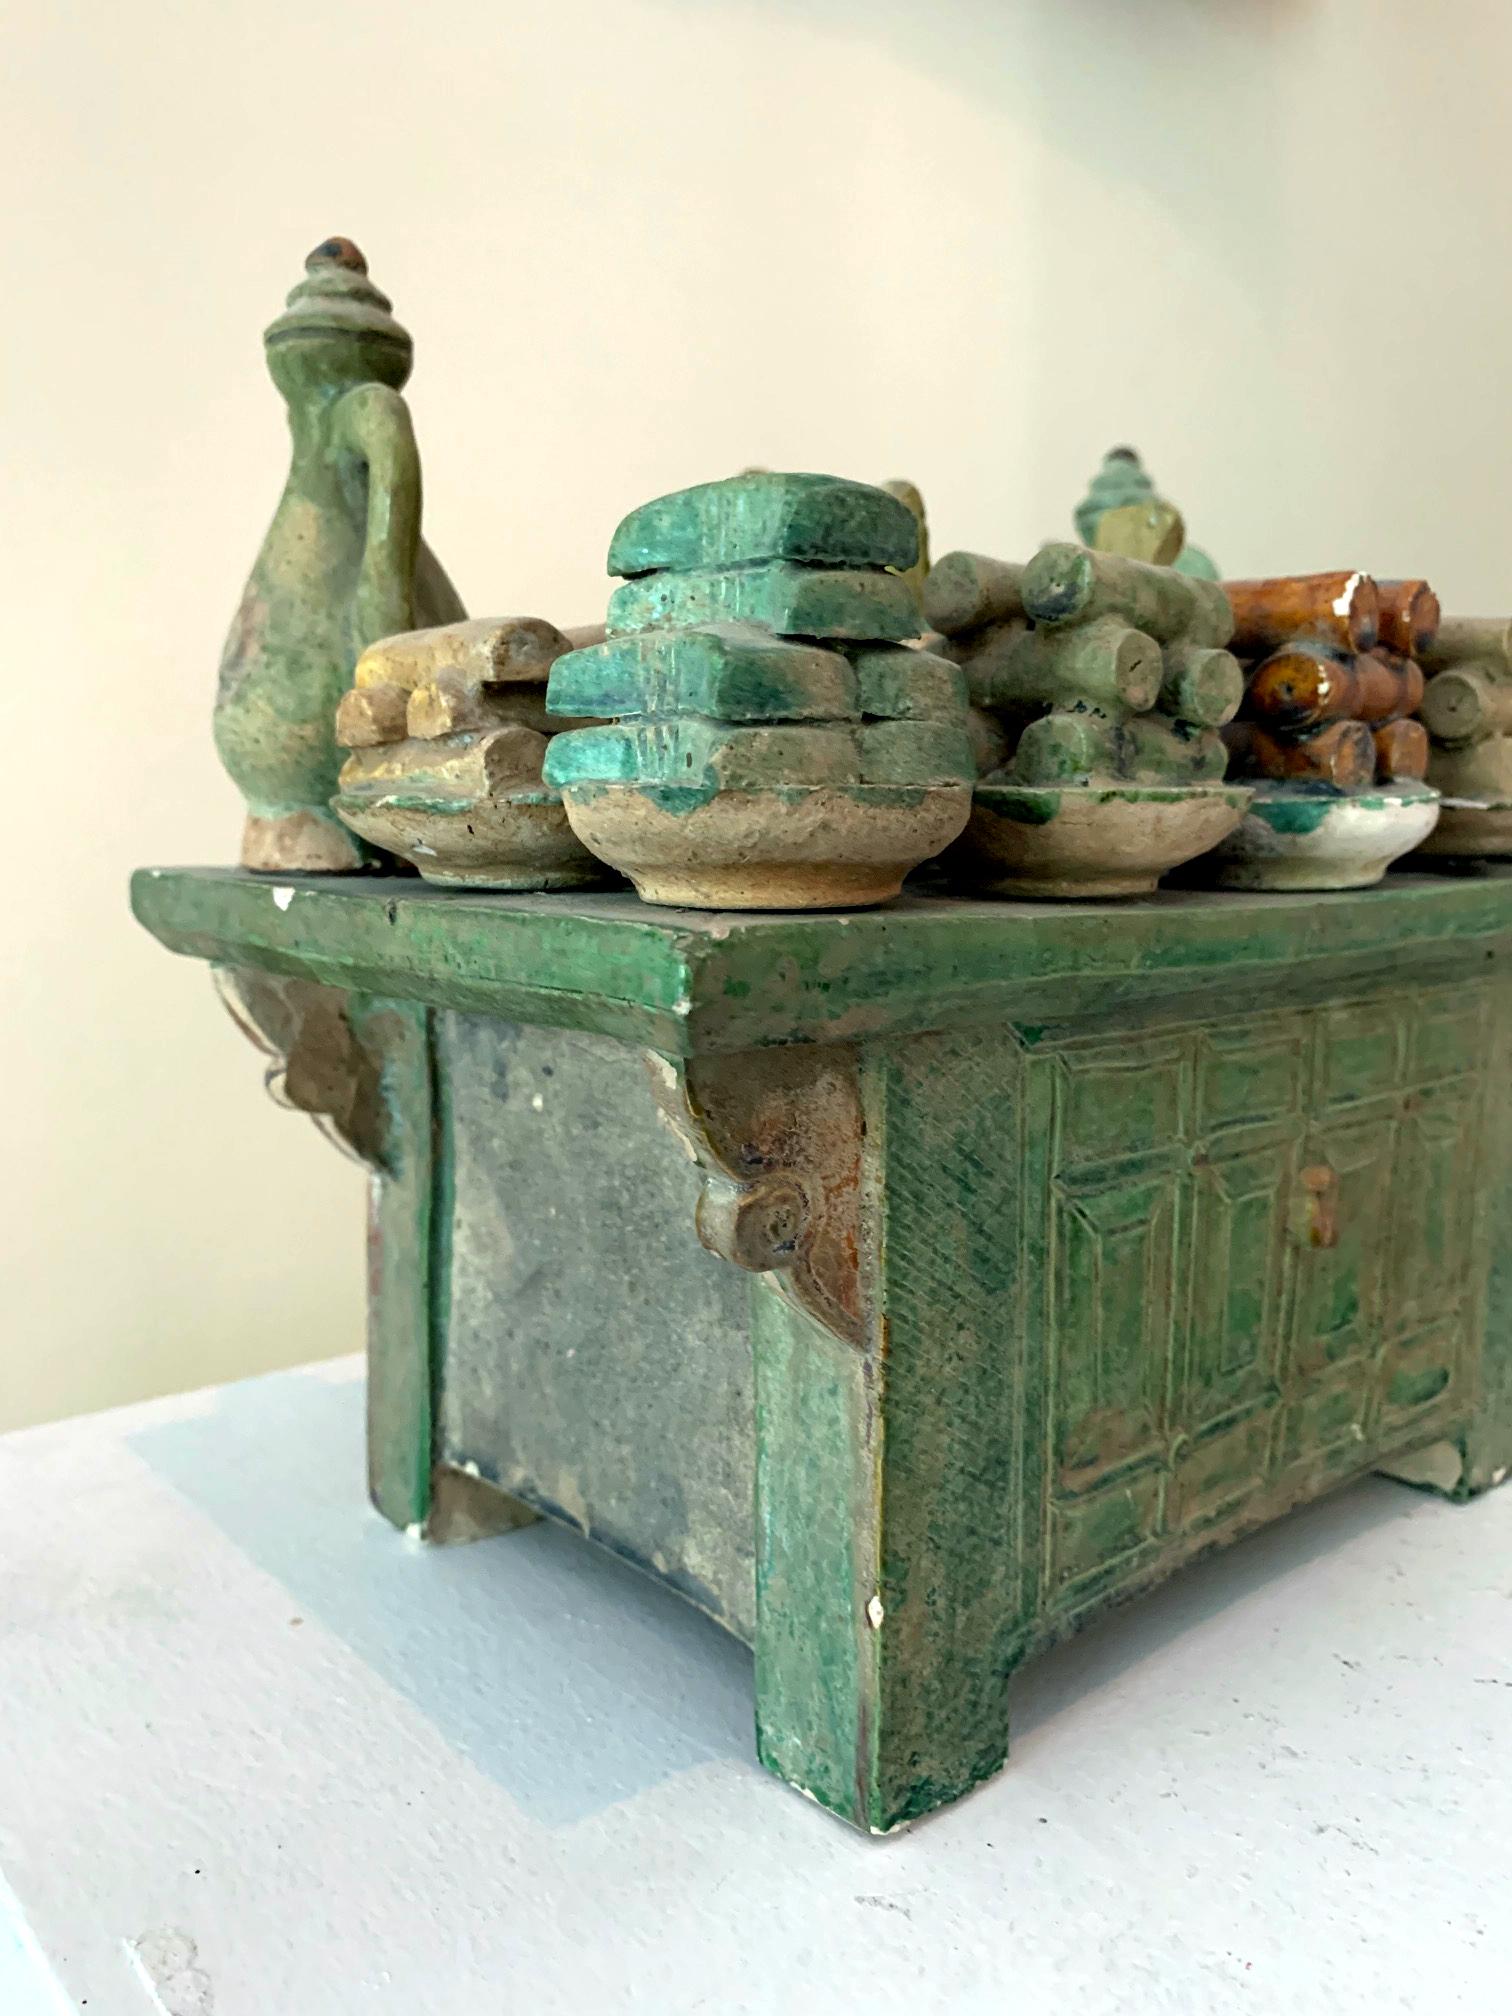 A stoneware model of an altar used as funeral object in the tomb, circa Ming dynasty, China (14th-17th century). This altar model was well made with great details, likely for a wealthy patron. Such objects placed in the tomb were always modeled